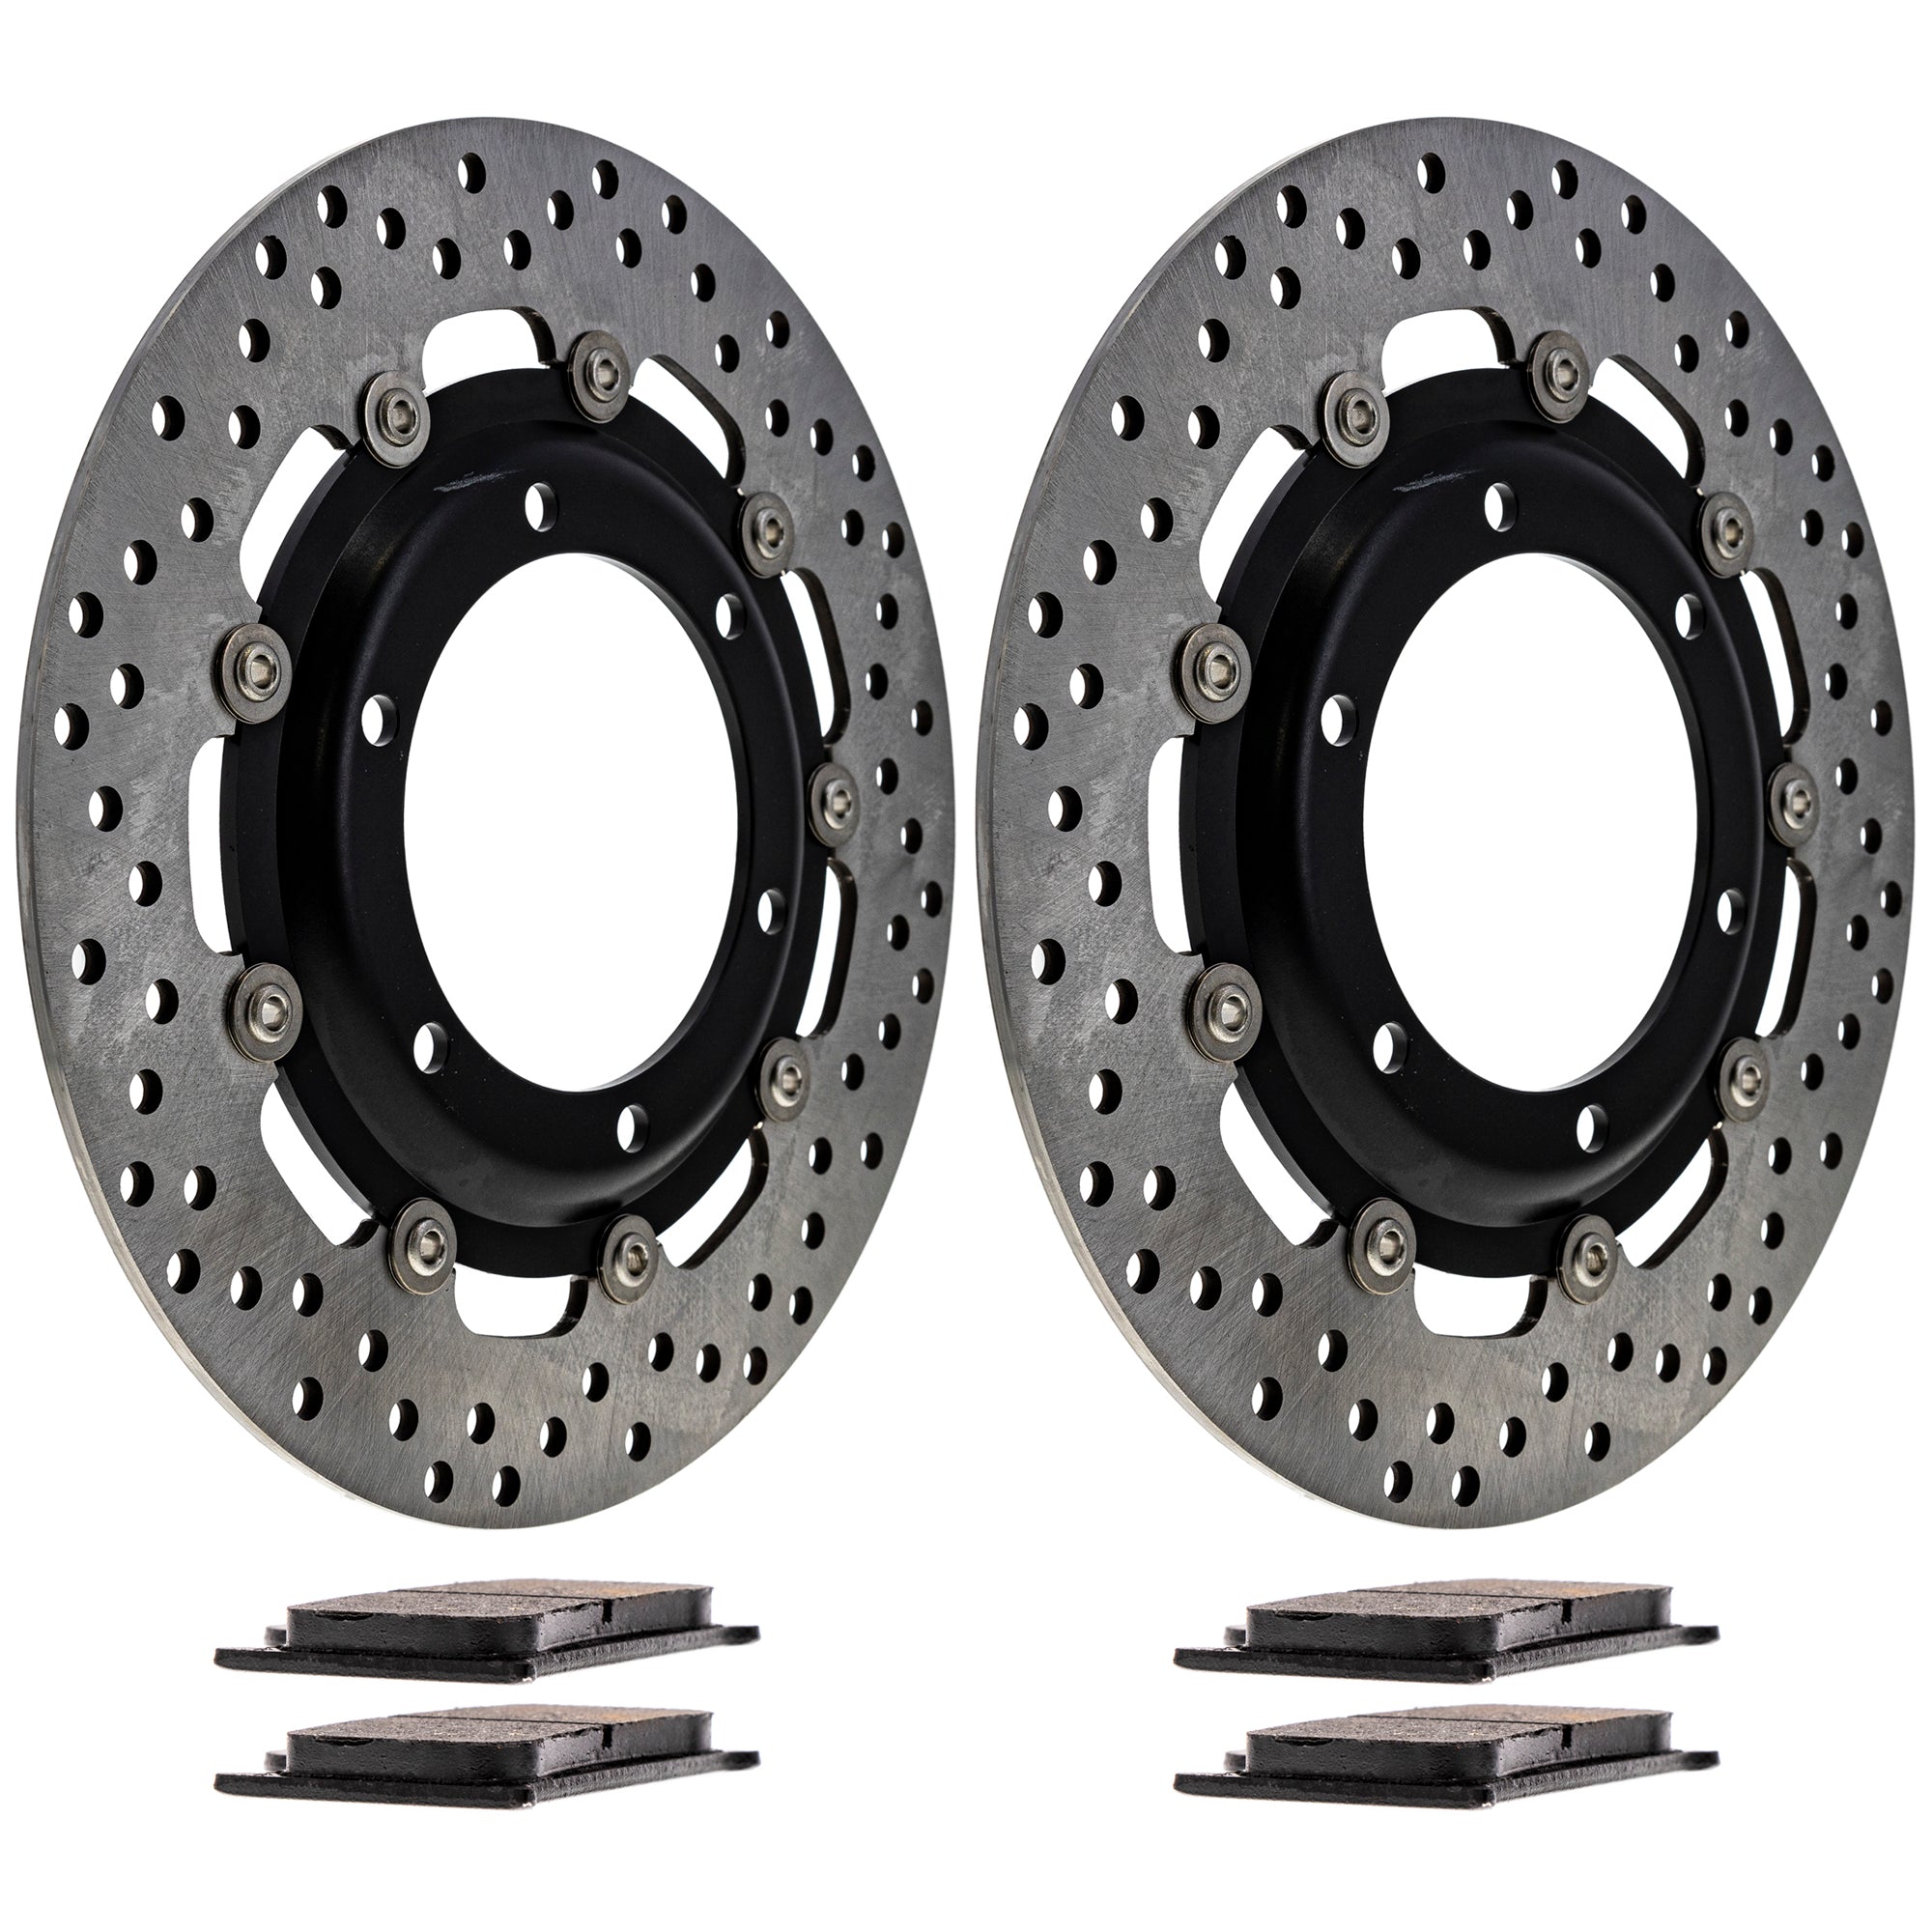 Front Brake Rotors and Pads Kit for zOTHER BMW Speed T2020393 T2020245 T2020553 T2020211 NICHE MK1007342